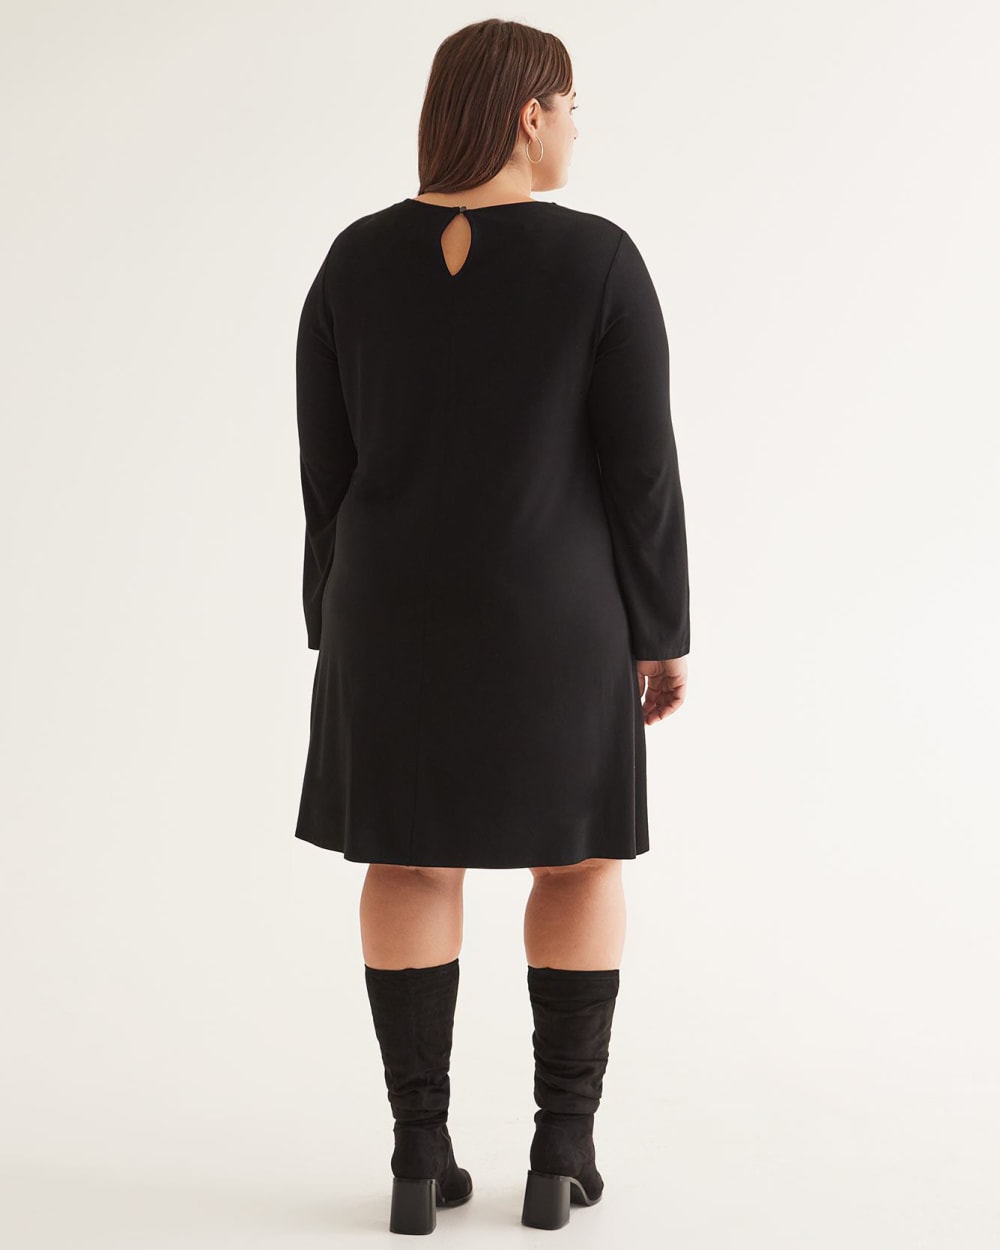 Responsible, Knit Dress with Long Bell Sleeves